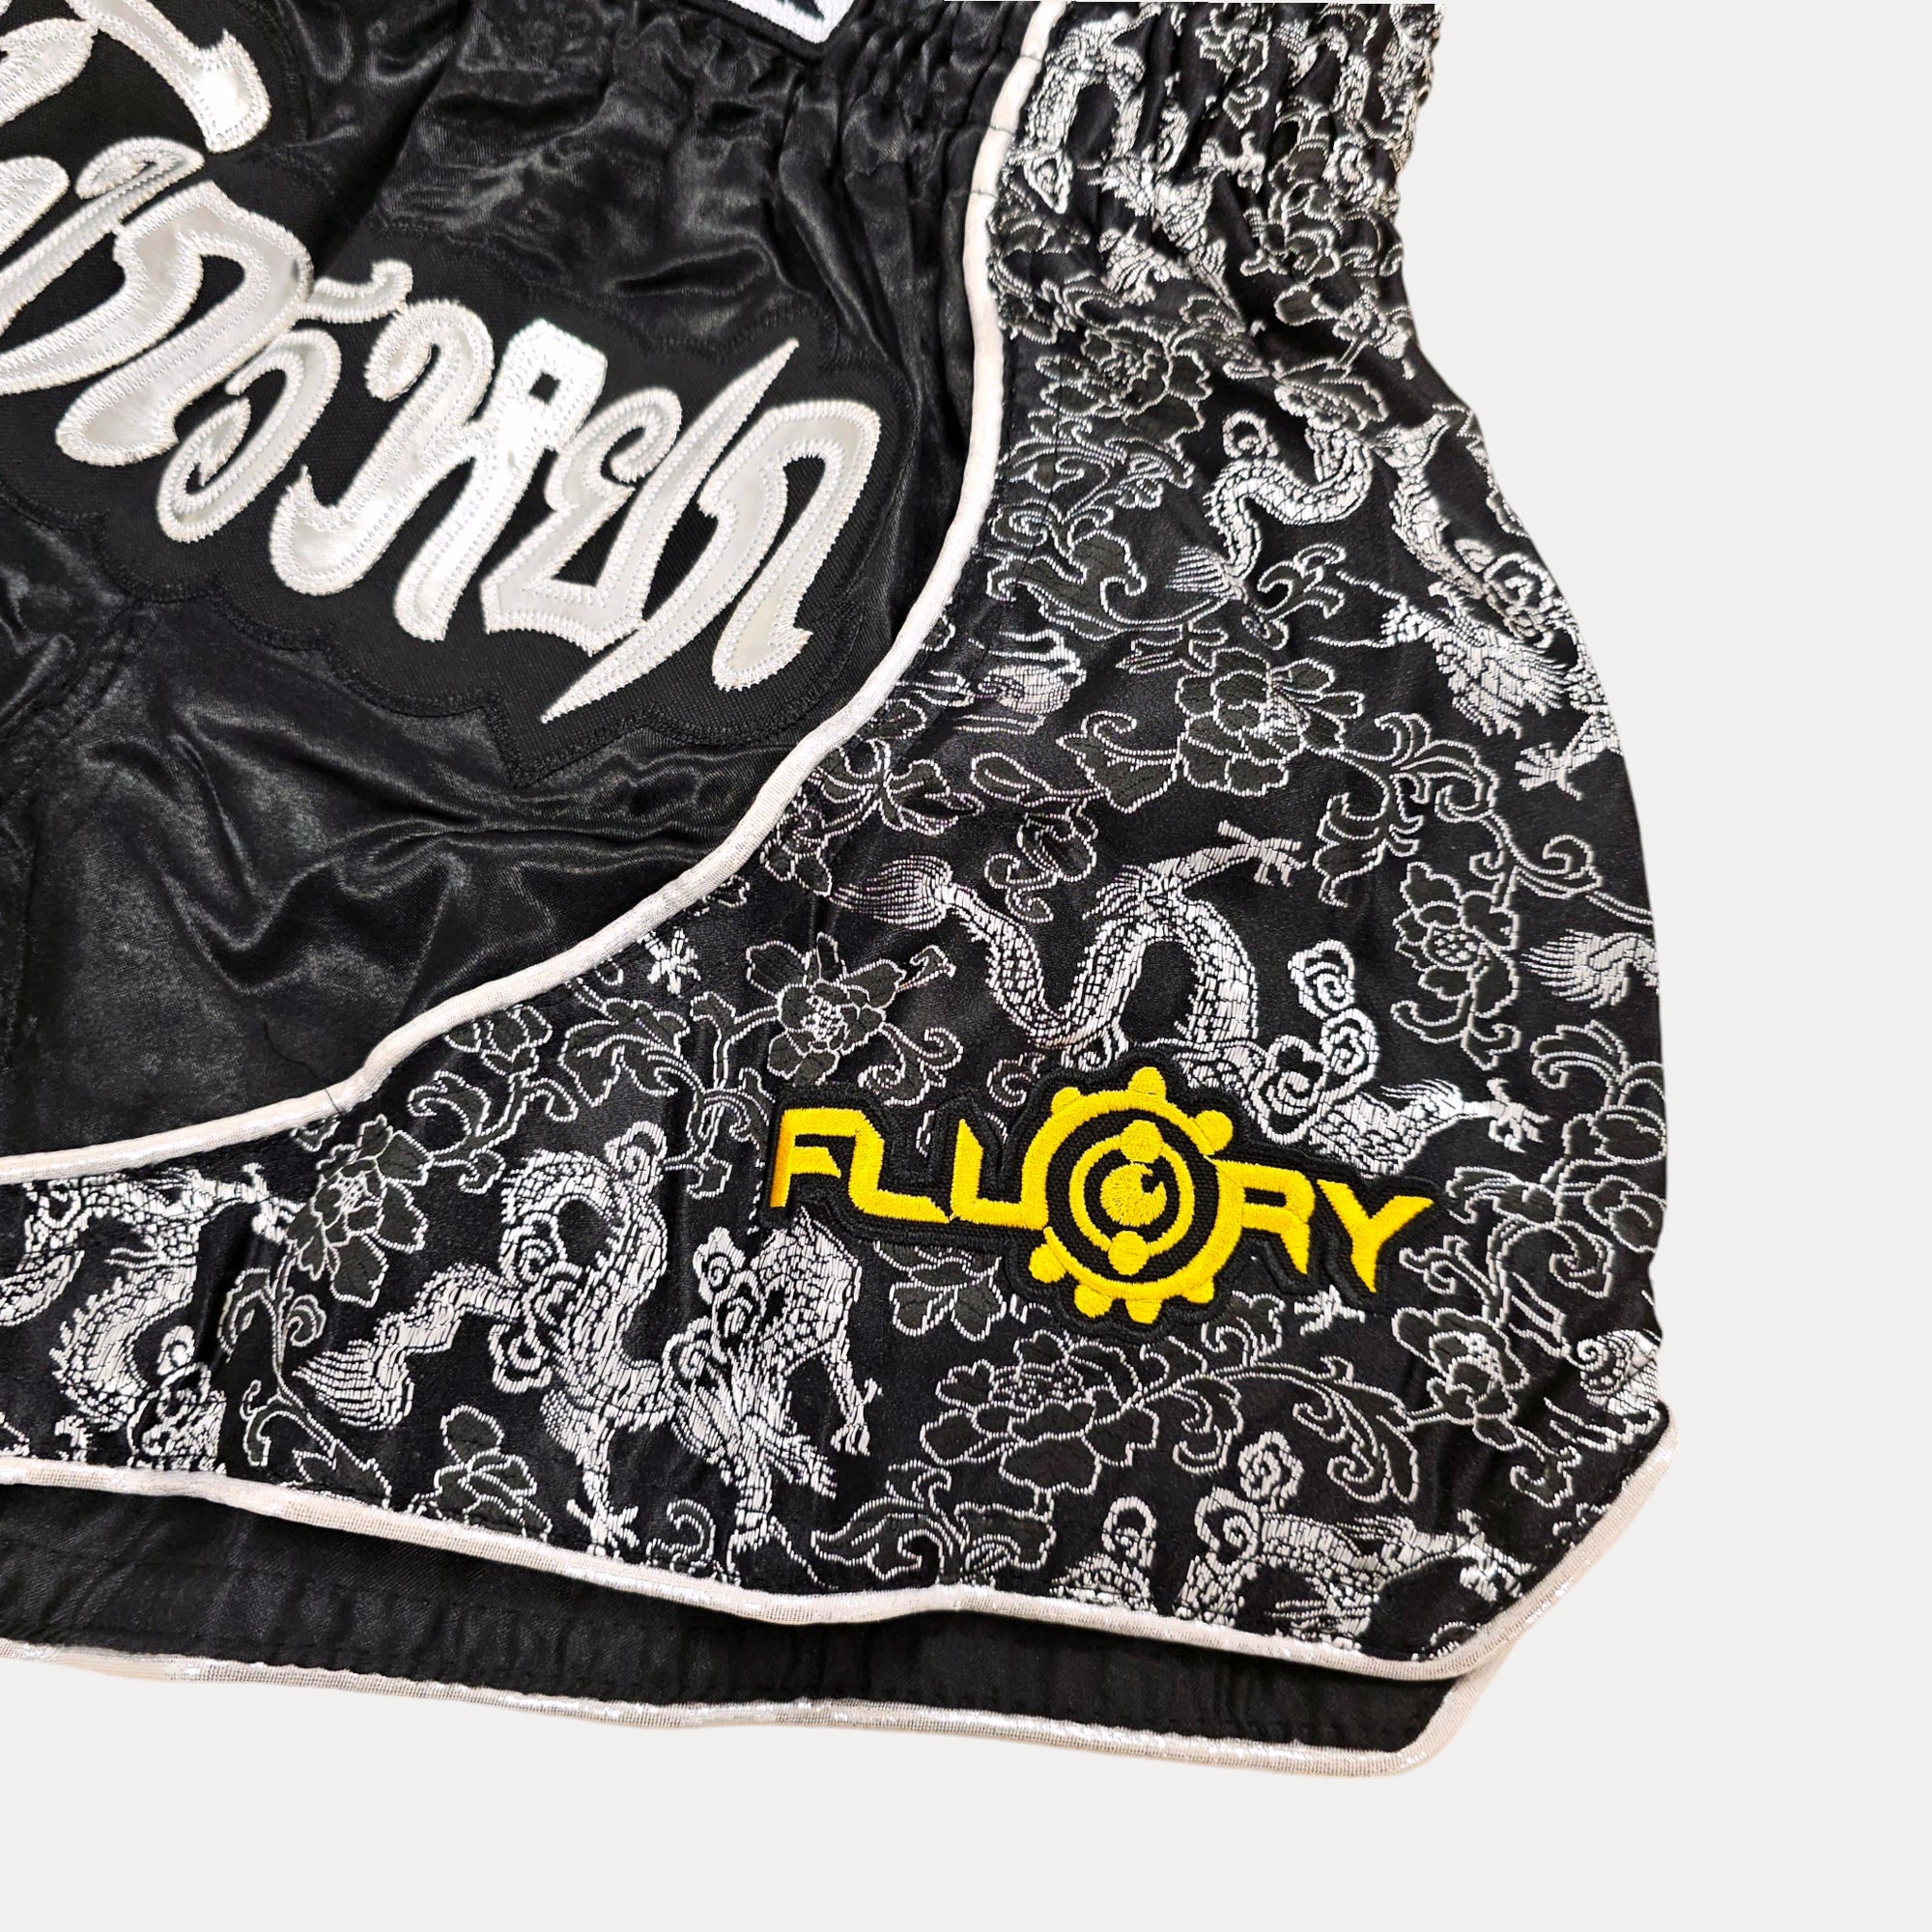 Fluory Silver Leaf Adult Muay Thai Shorts  Fight Co